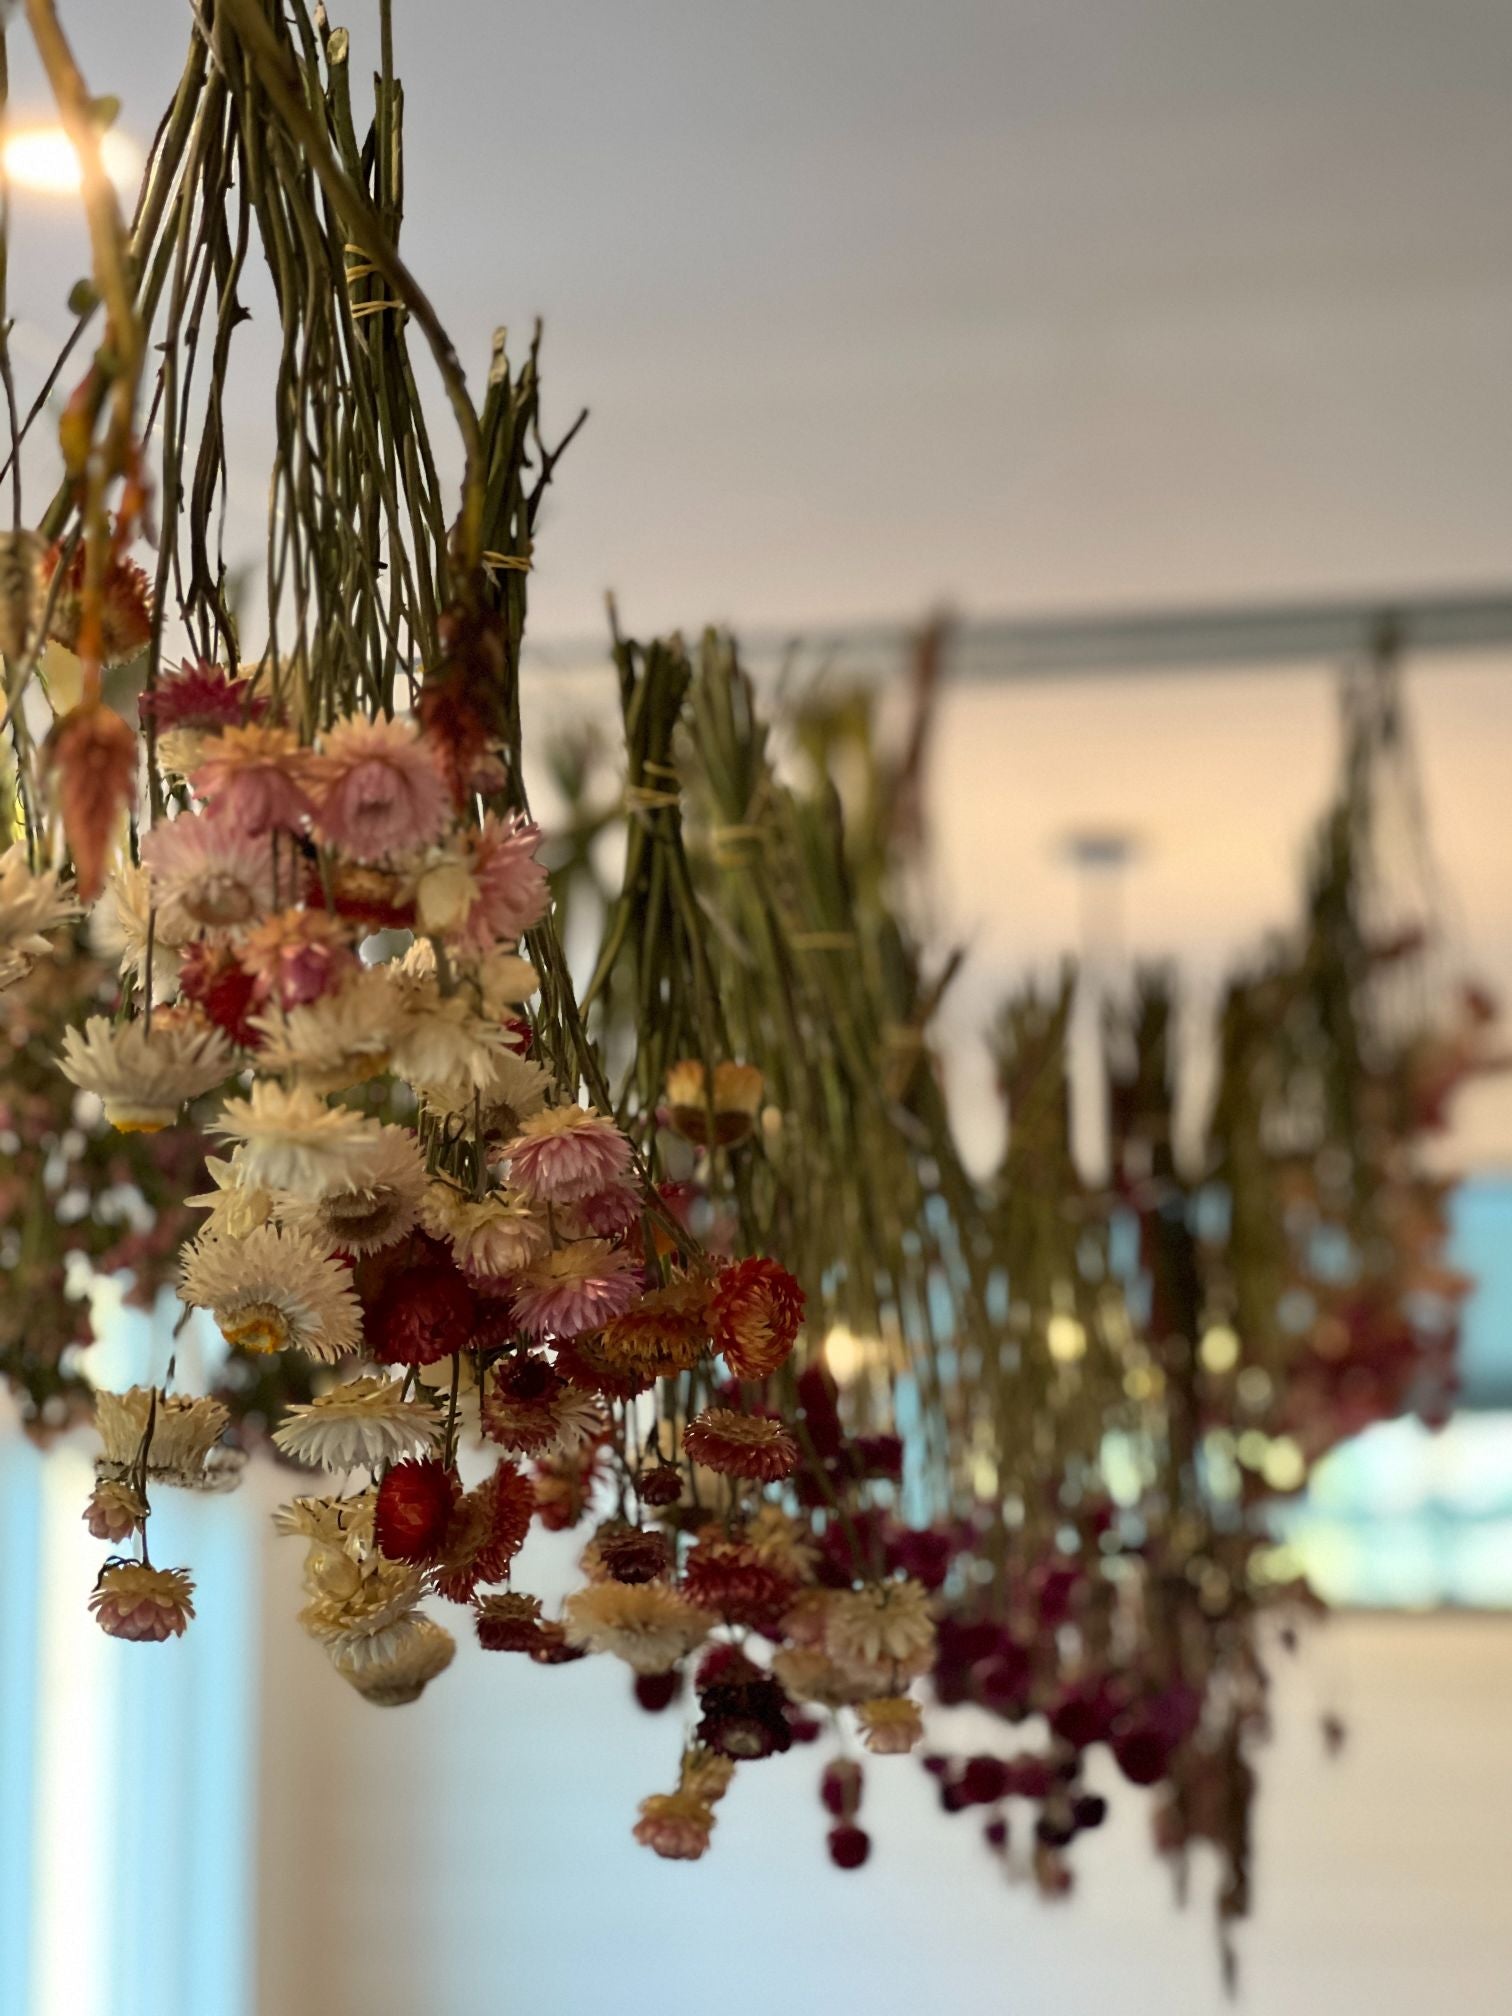 How to dry flowers